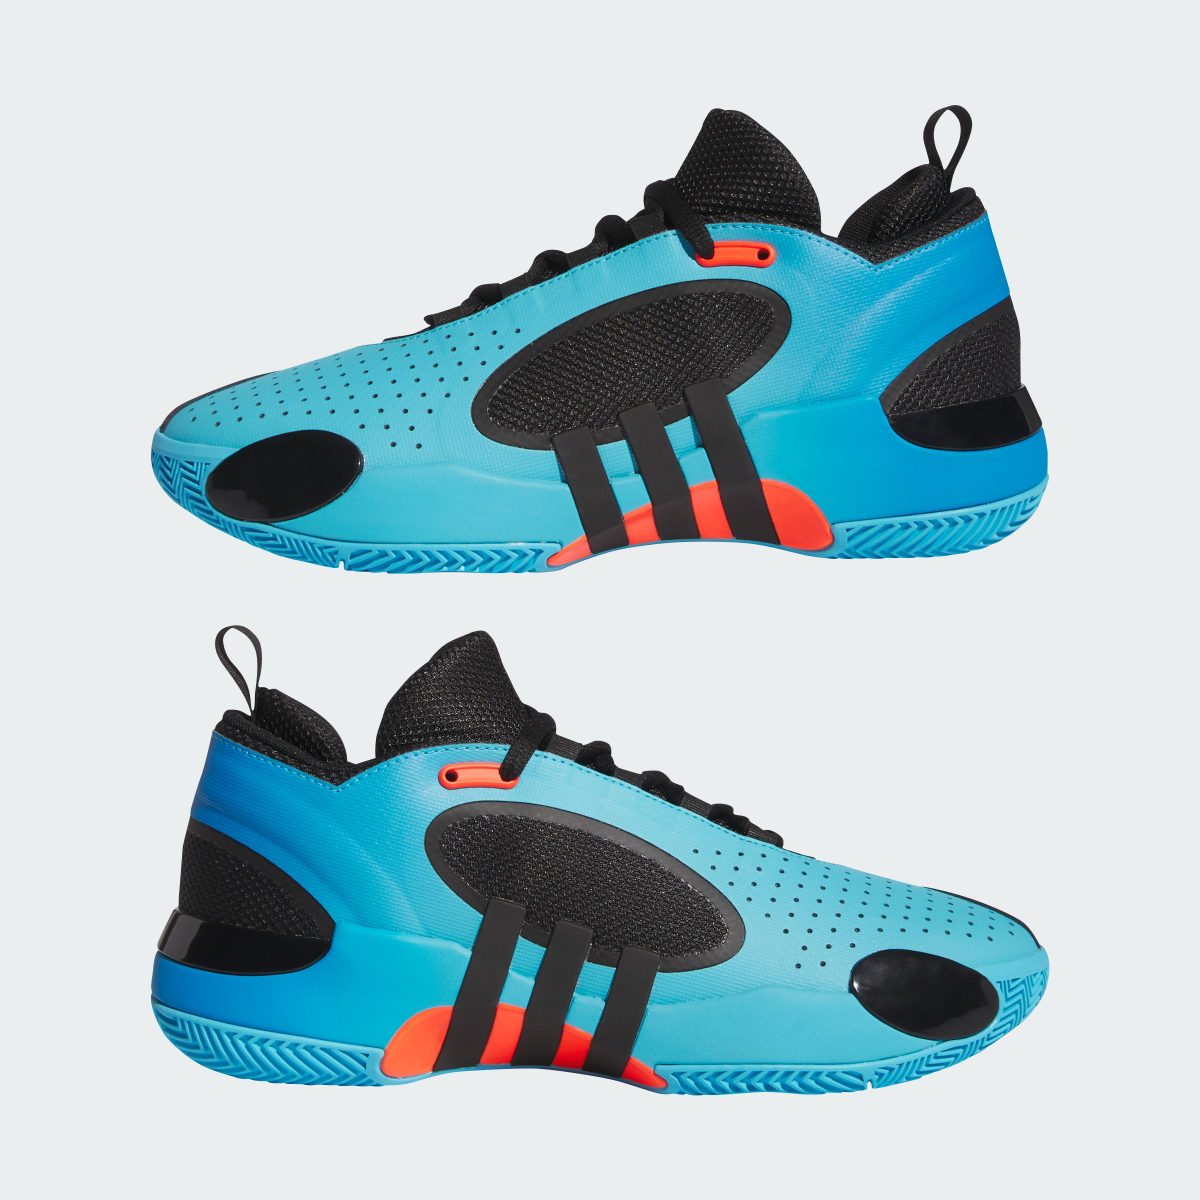 Adidas D.O.N. Issue 5 Basketball Shoes. 8